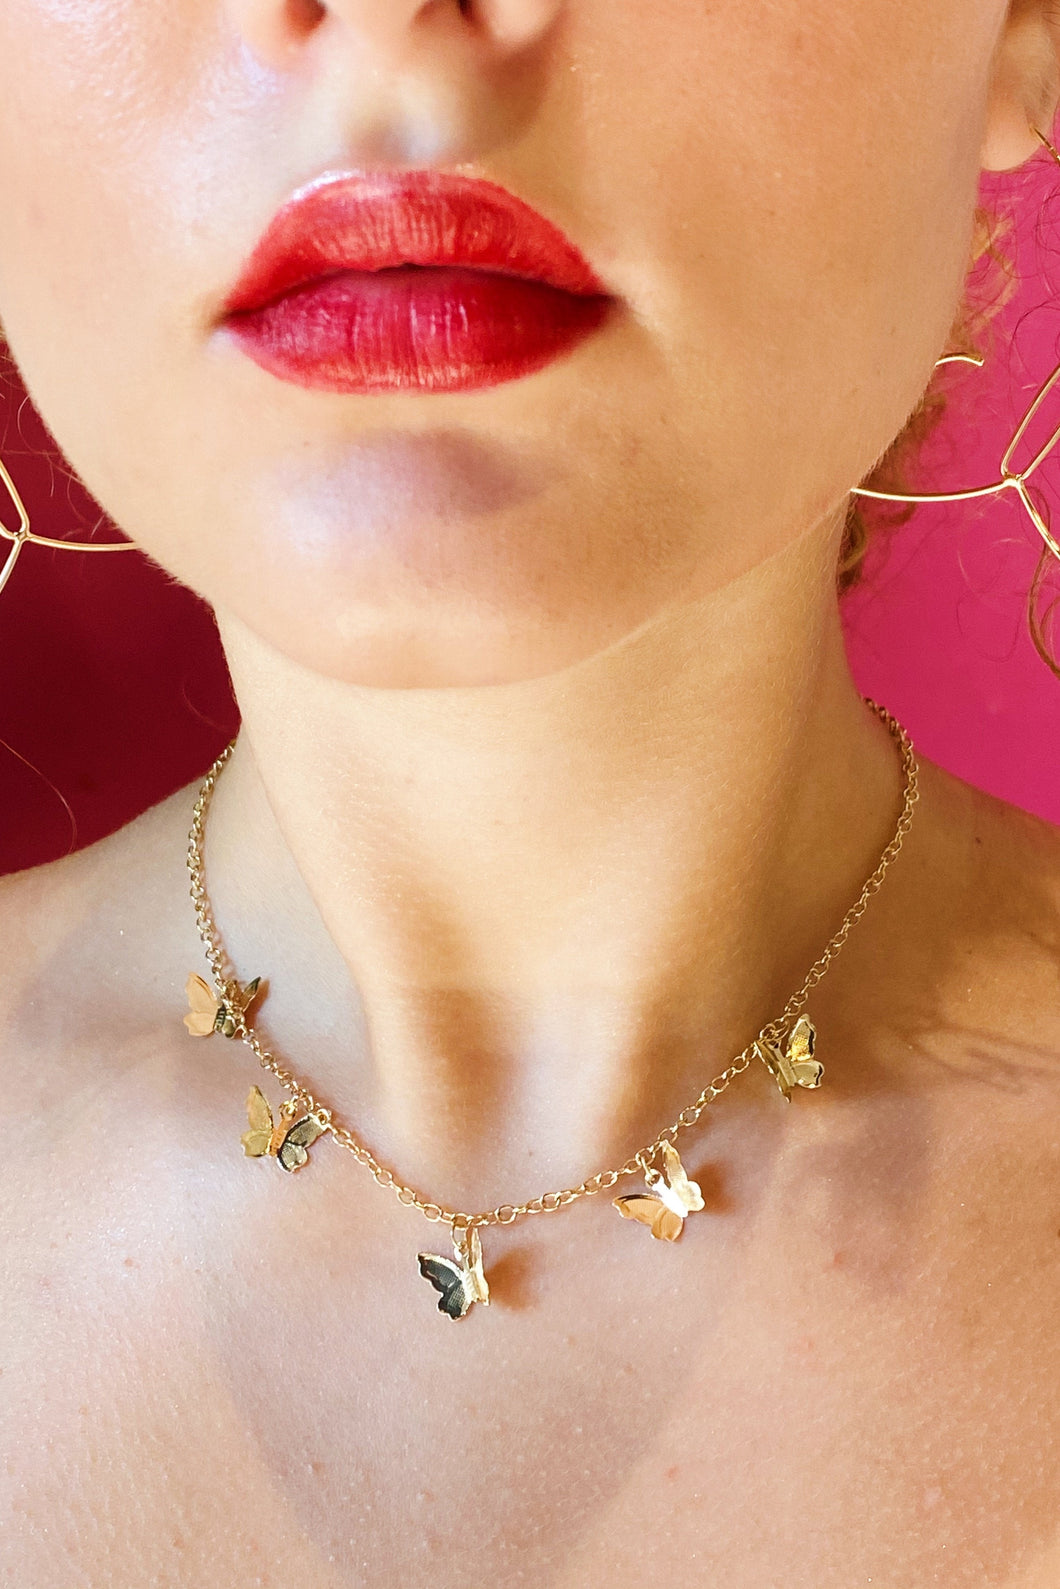 The gold butterfly colony necklace shown around a woman’s neck.